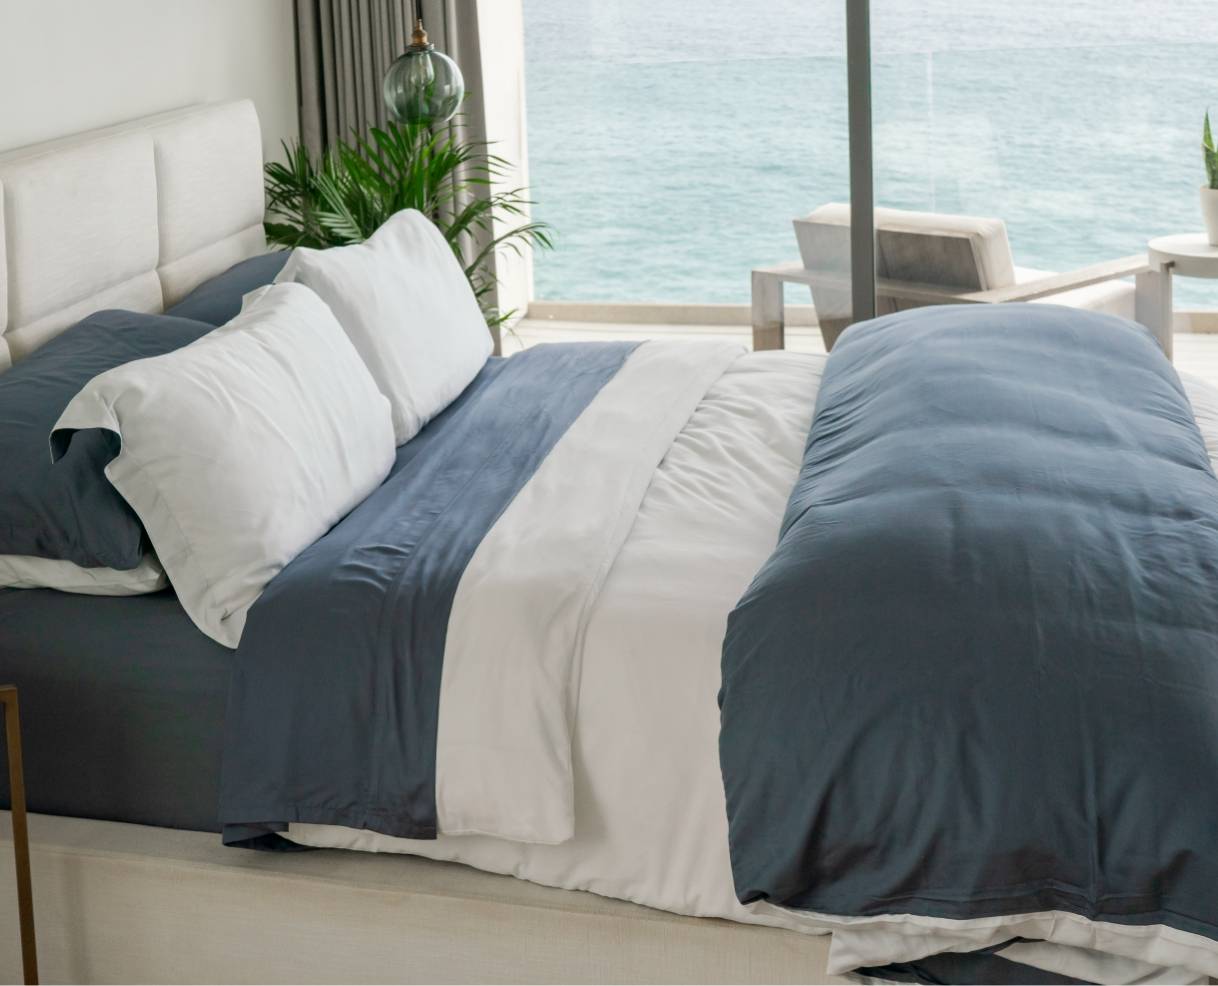 bed with duvet cover and sheets